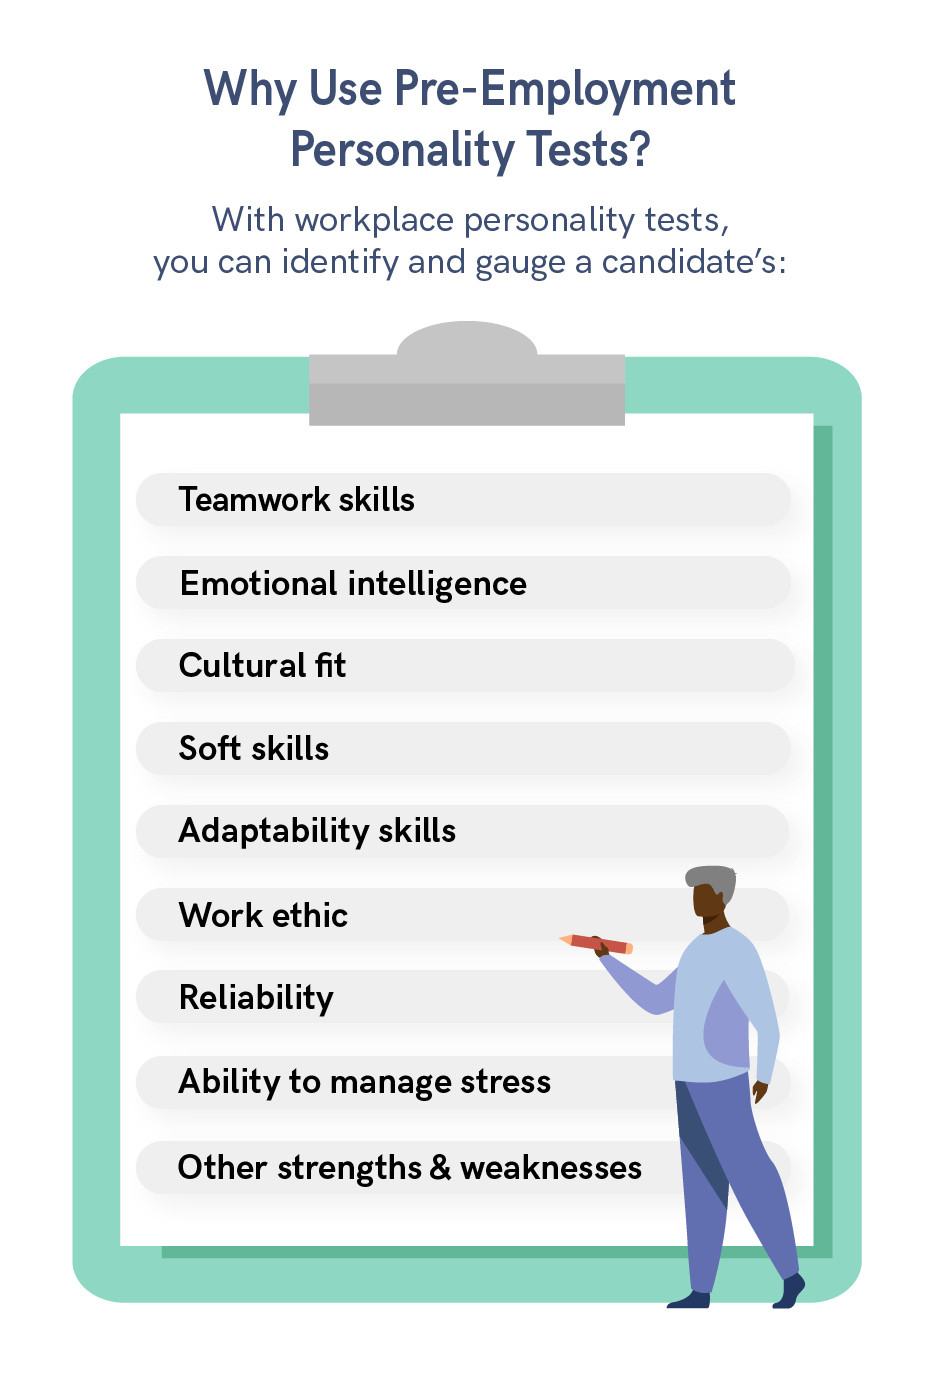 What is a pre-employment personality test?